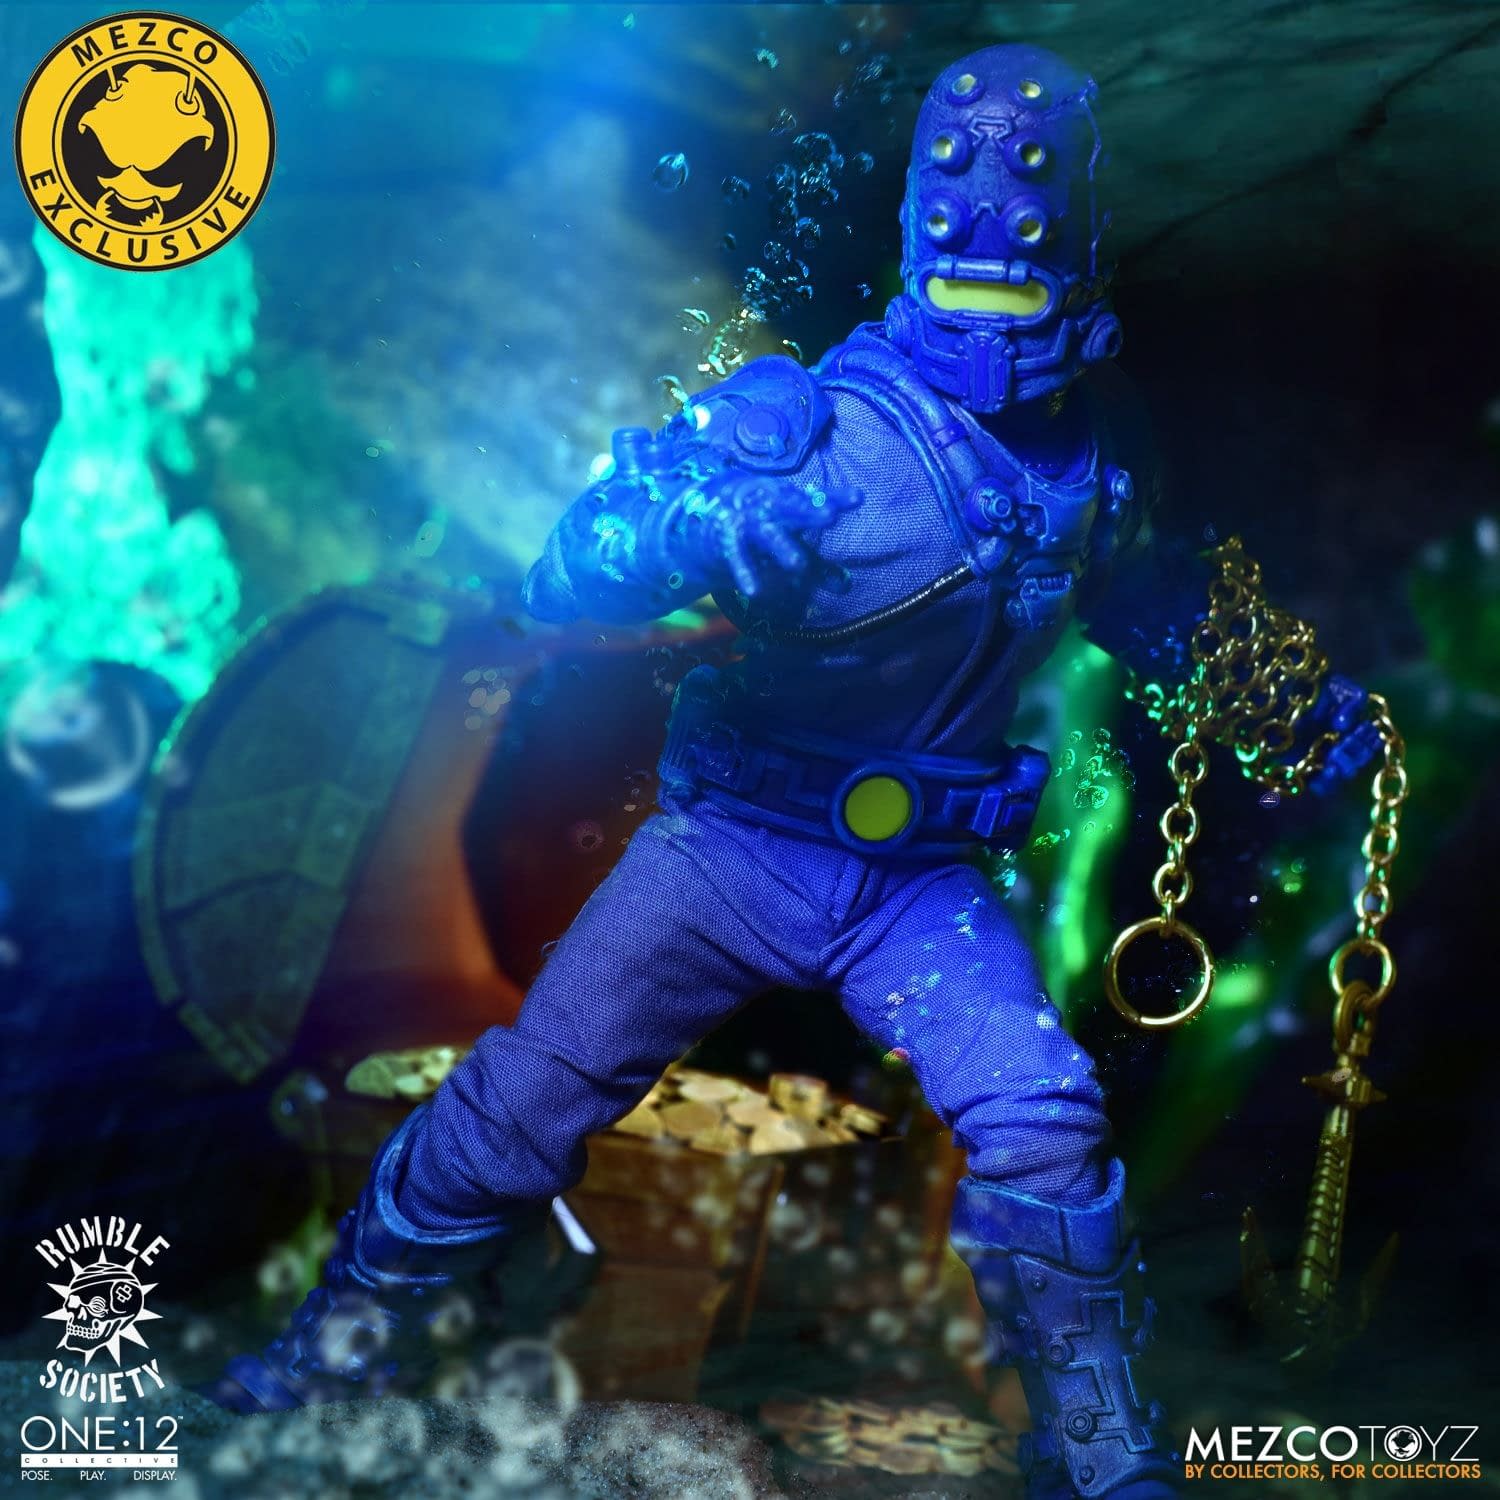 Baron Bends and the Aquaticons from Mezco Toyz